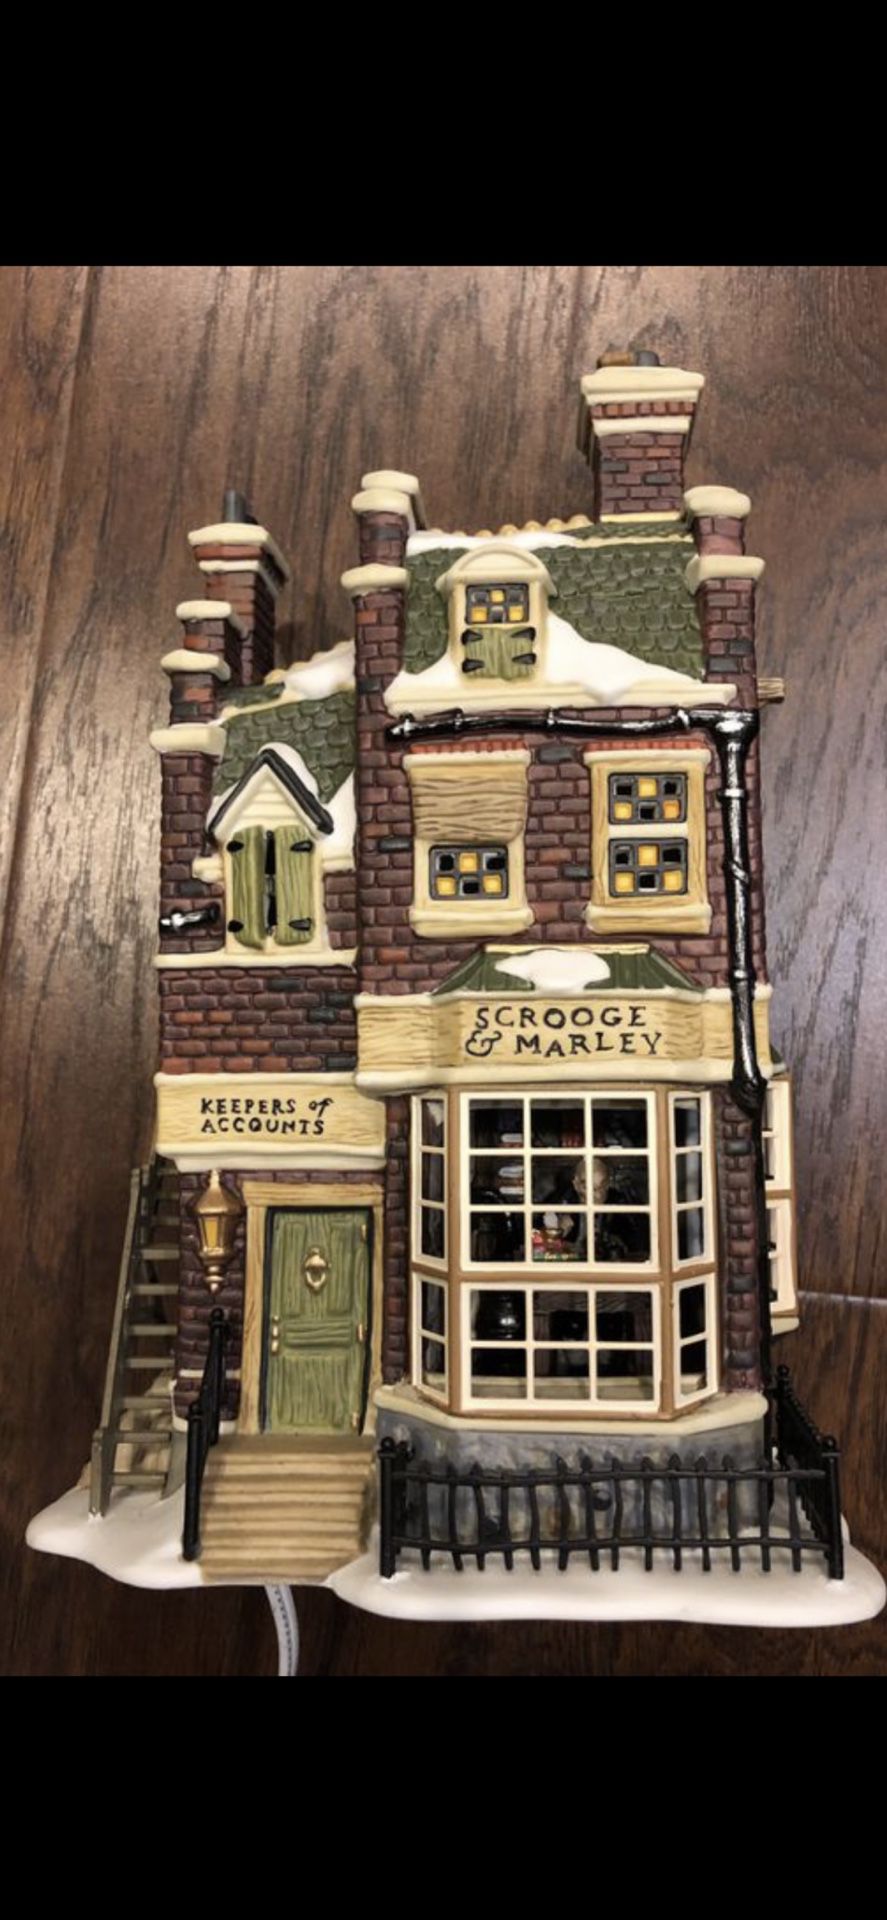 Department 56 - Scrooge & Marley’s Counting House